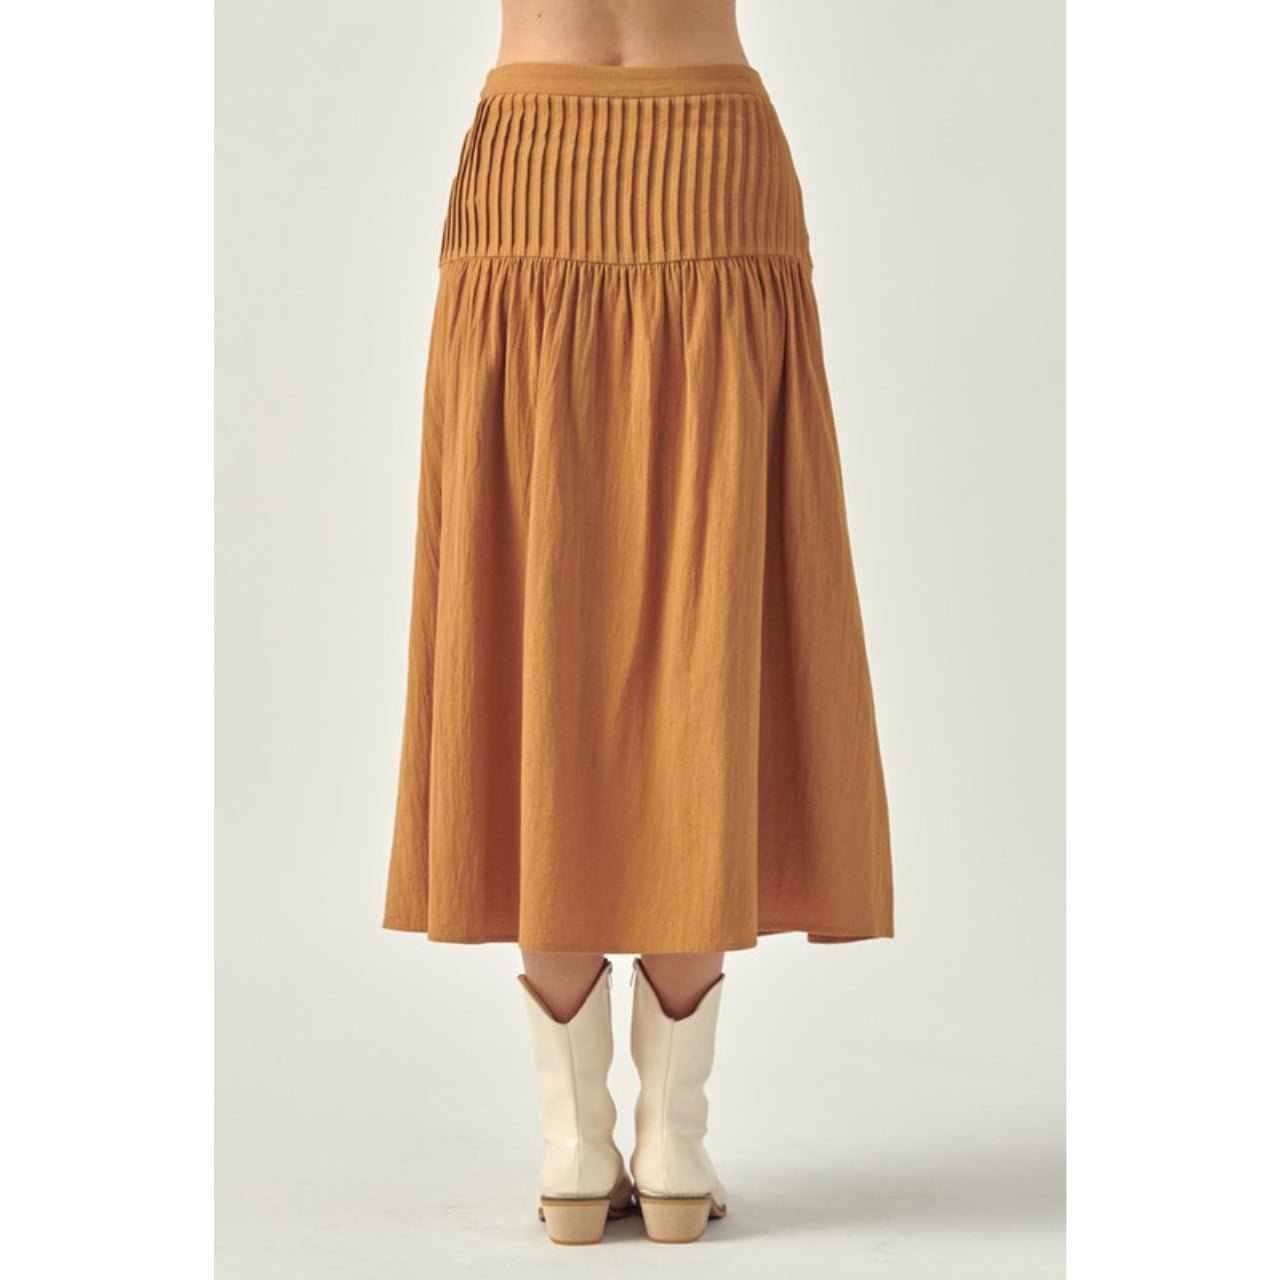 Carmella Carmel Button Down Long Lined Pleated Skirt - The Graphic Tee